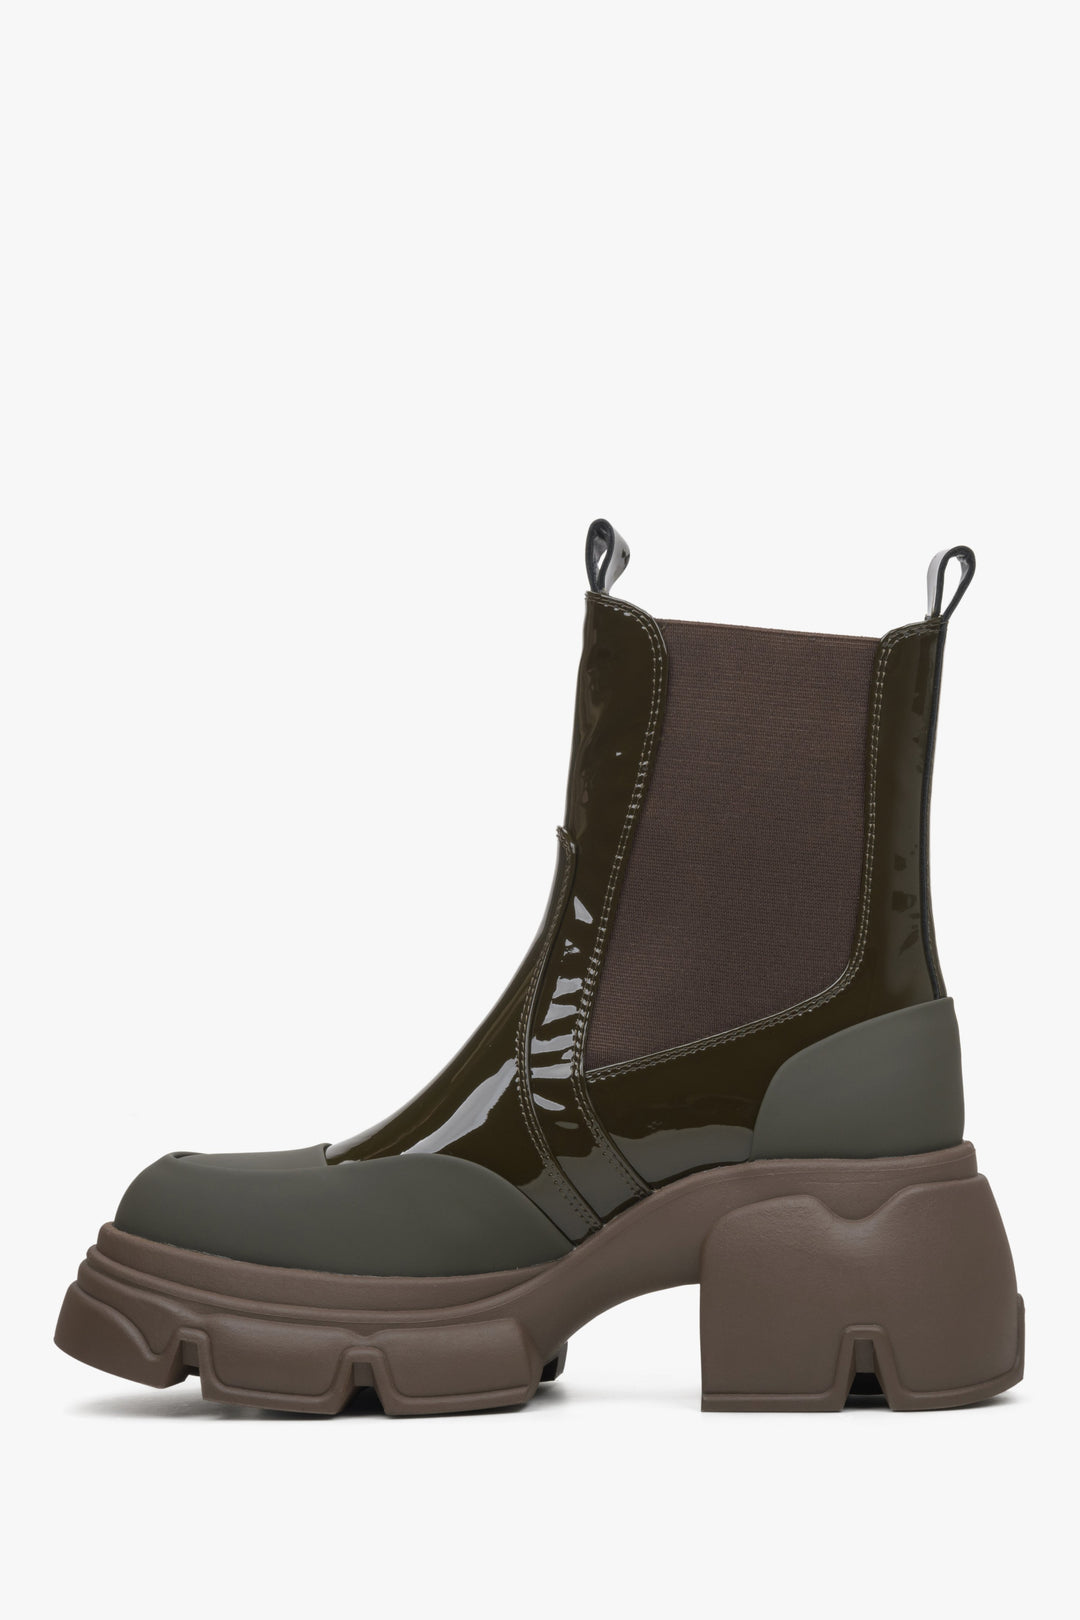 Women's dark green Chelsea boots by Estro made of patent natural leather - shoe profile.